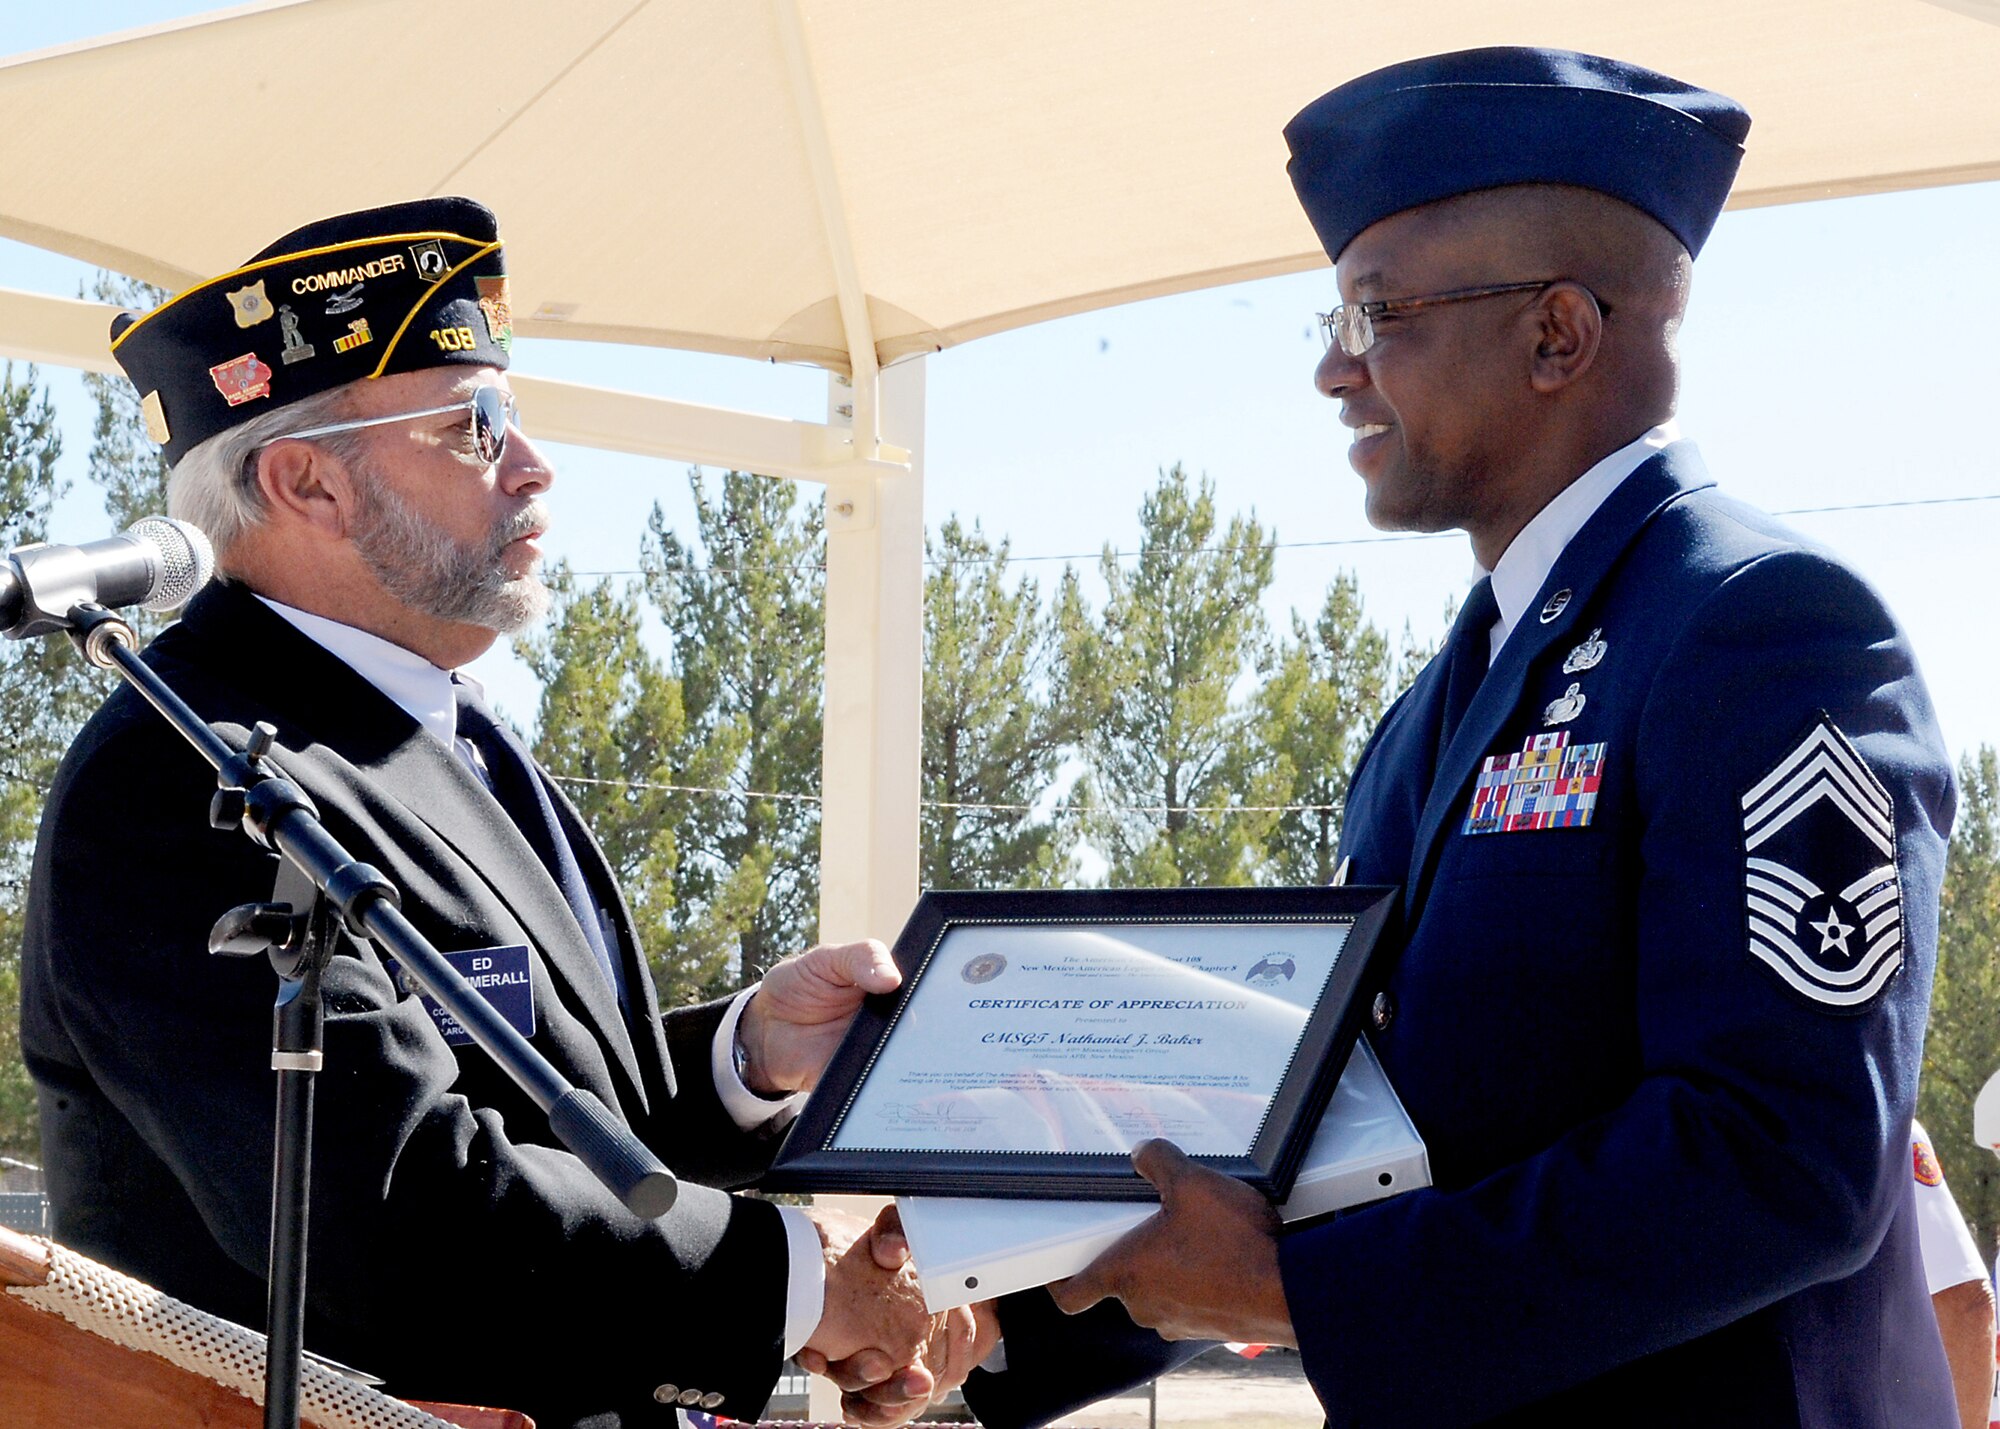 TULAROSA, N.M. -- Ed Summerall, president of the American Legion of 108, presents Chief Master Sgt. Jerome Baker, 49th Mission Support Group superintendent, with a certificate of appreciation on Veteran's Day, Nov. 11, at Veteran's Park in Tularosa. Chief Baker was the guest speaker during the Veteran's Day celebration which honored military veterans. (U.S. Air Force photo by Staff Sgt. Anthony Nelson Jr.)